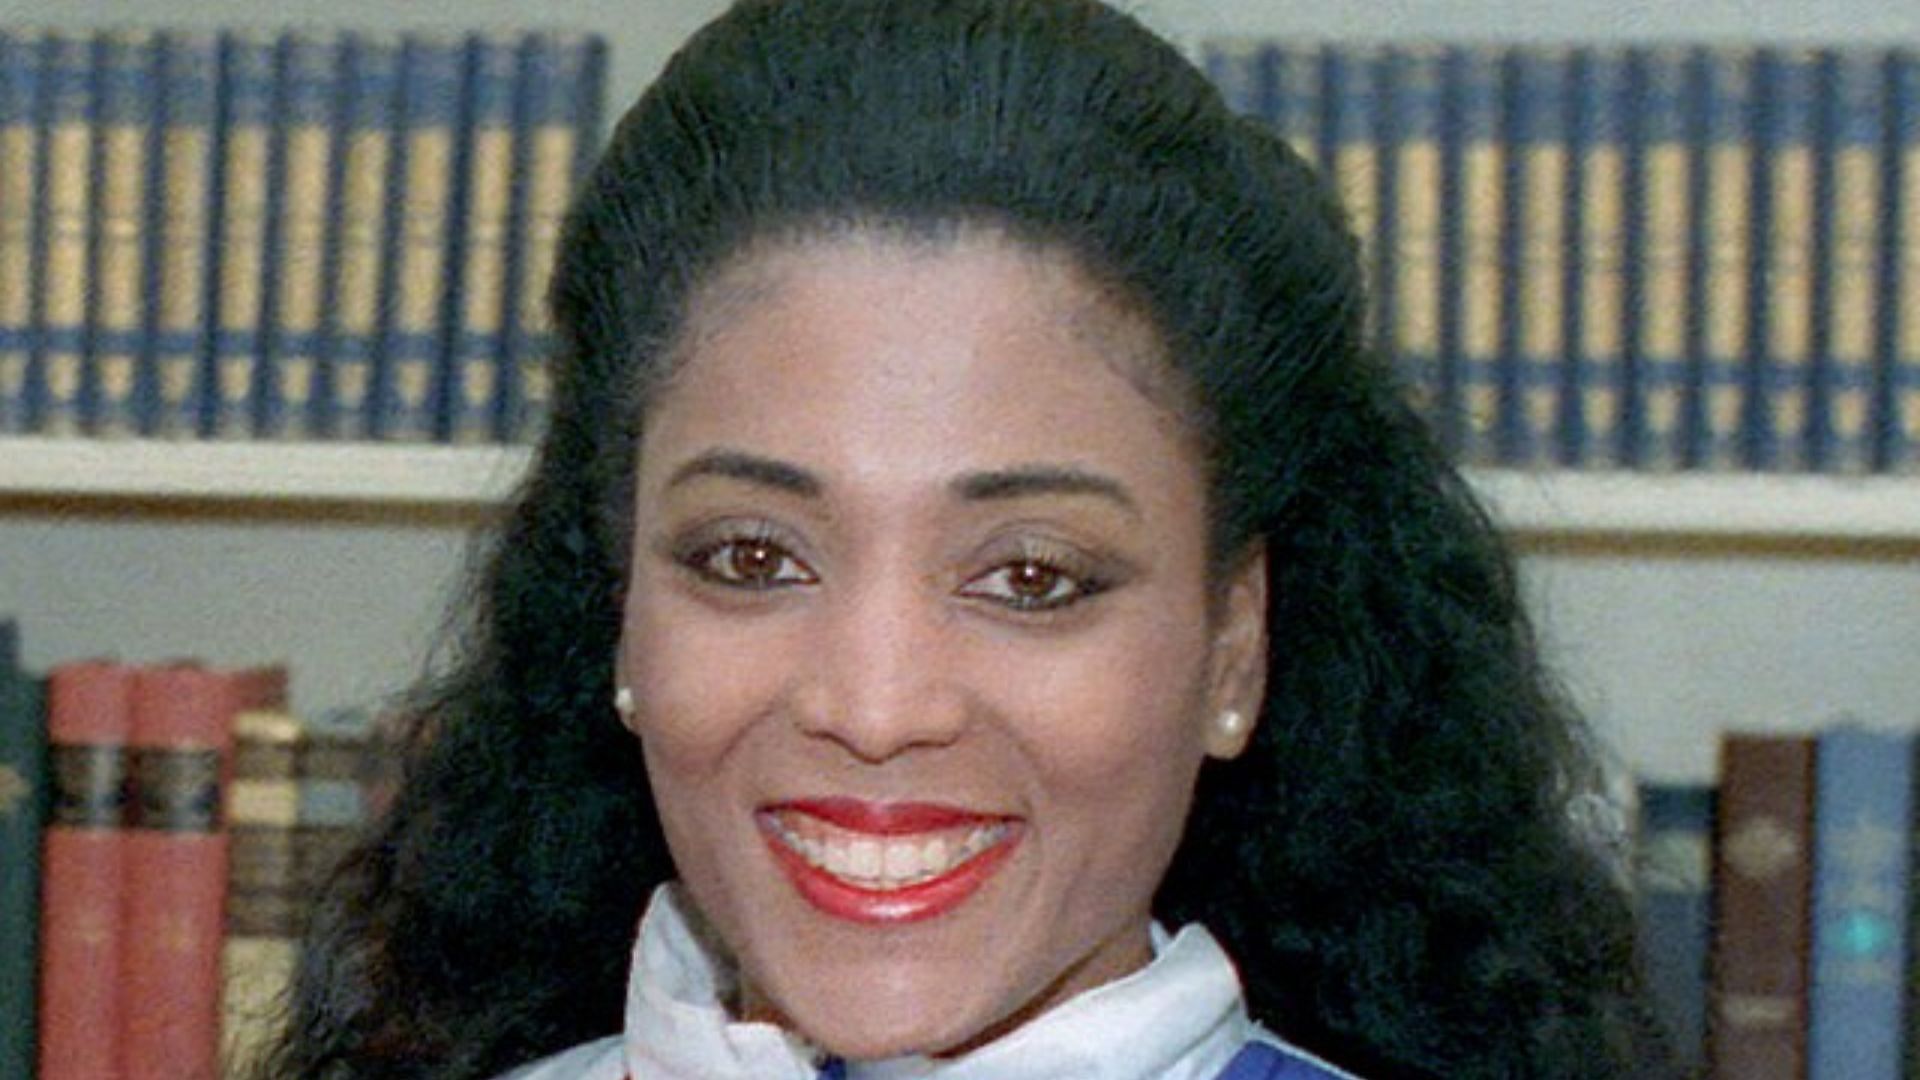 Florence Griffith-Joyner image from her competition days